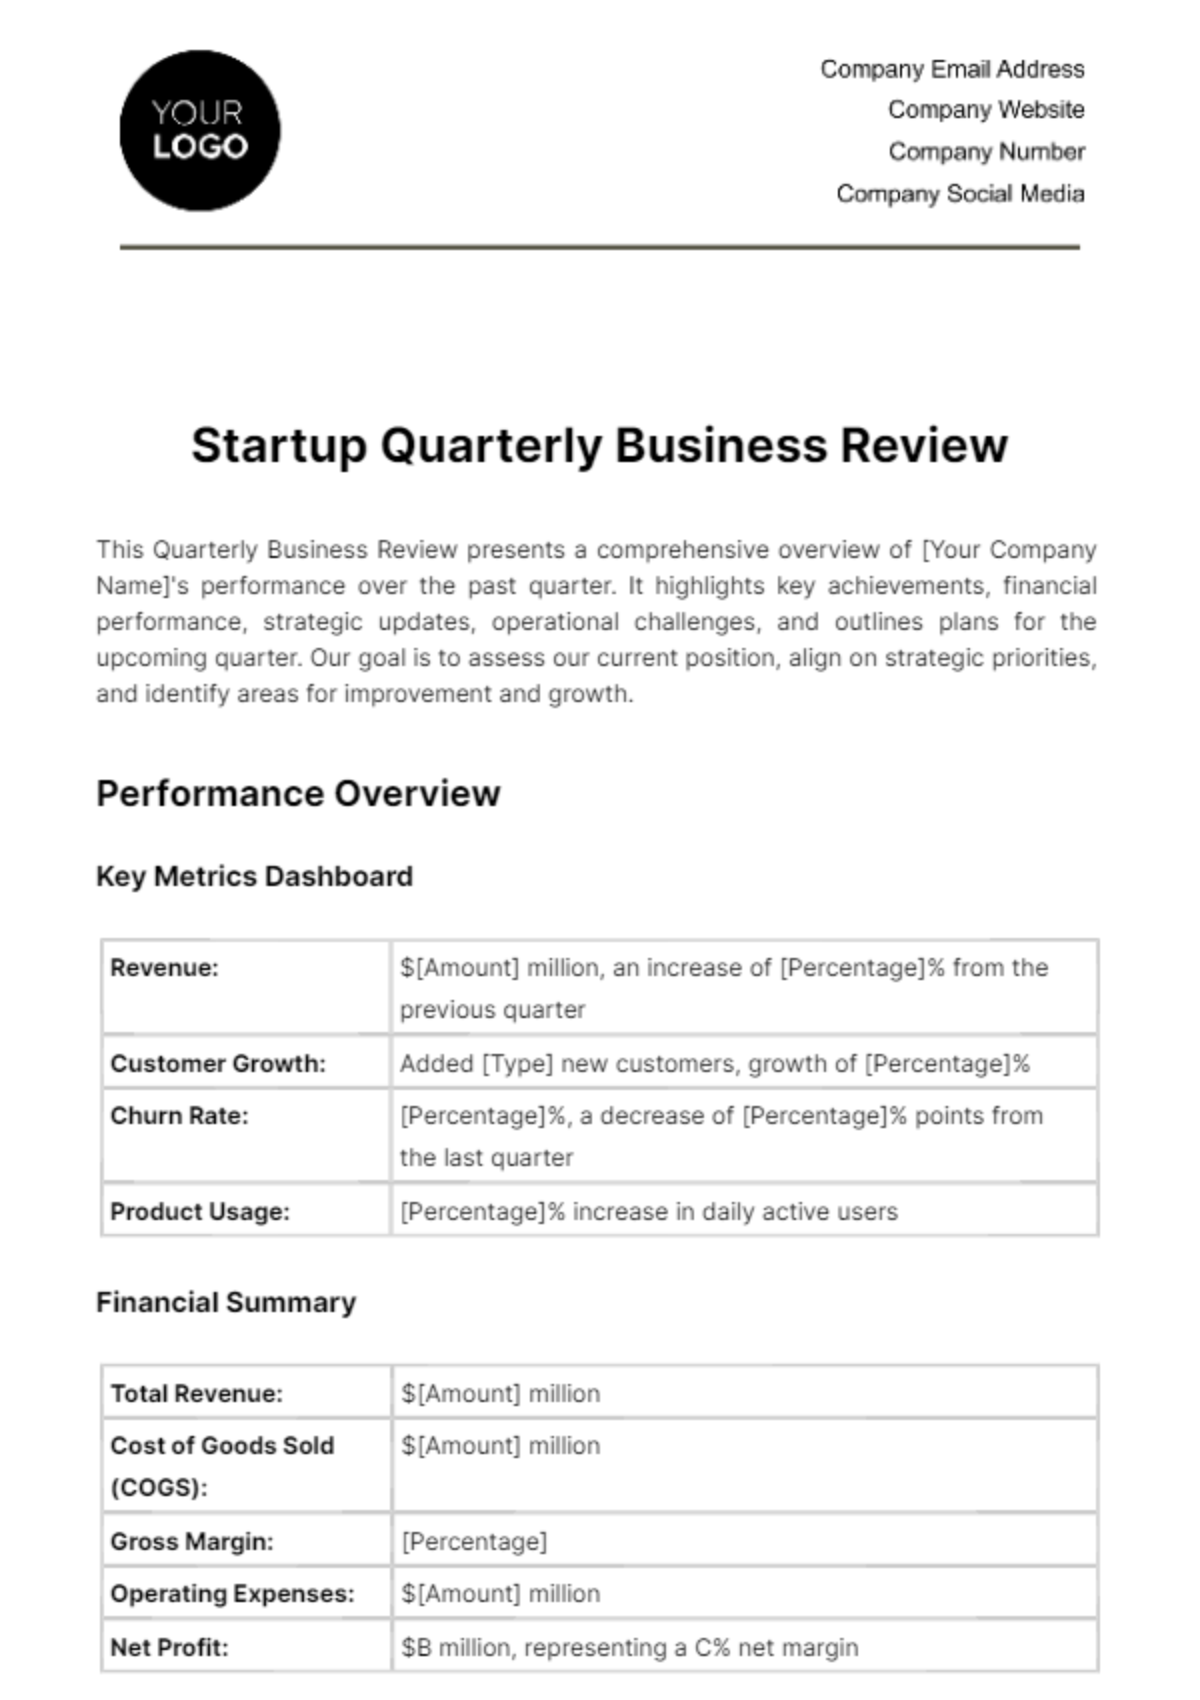 Free Startup Quarterly Business Review Template